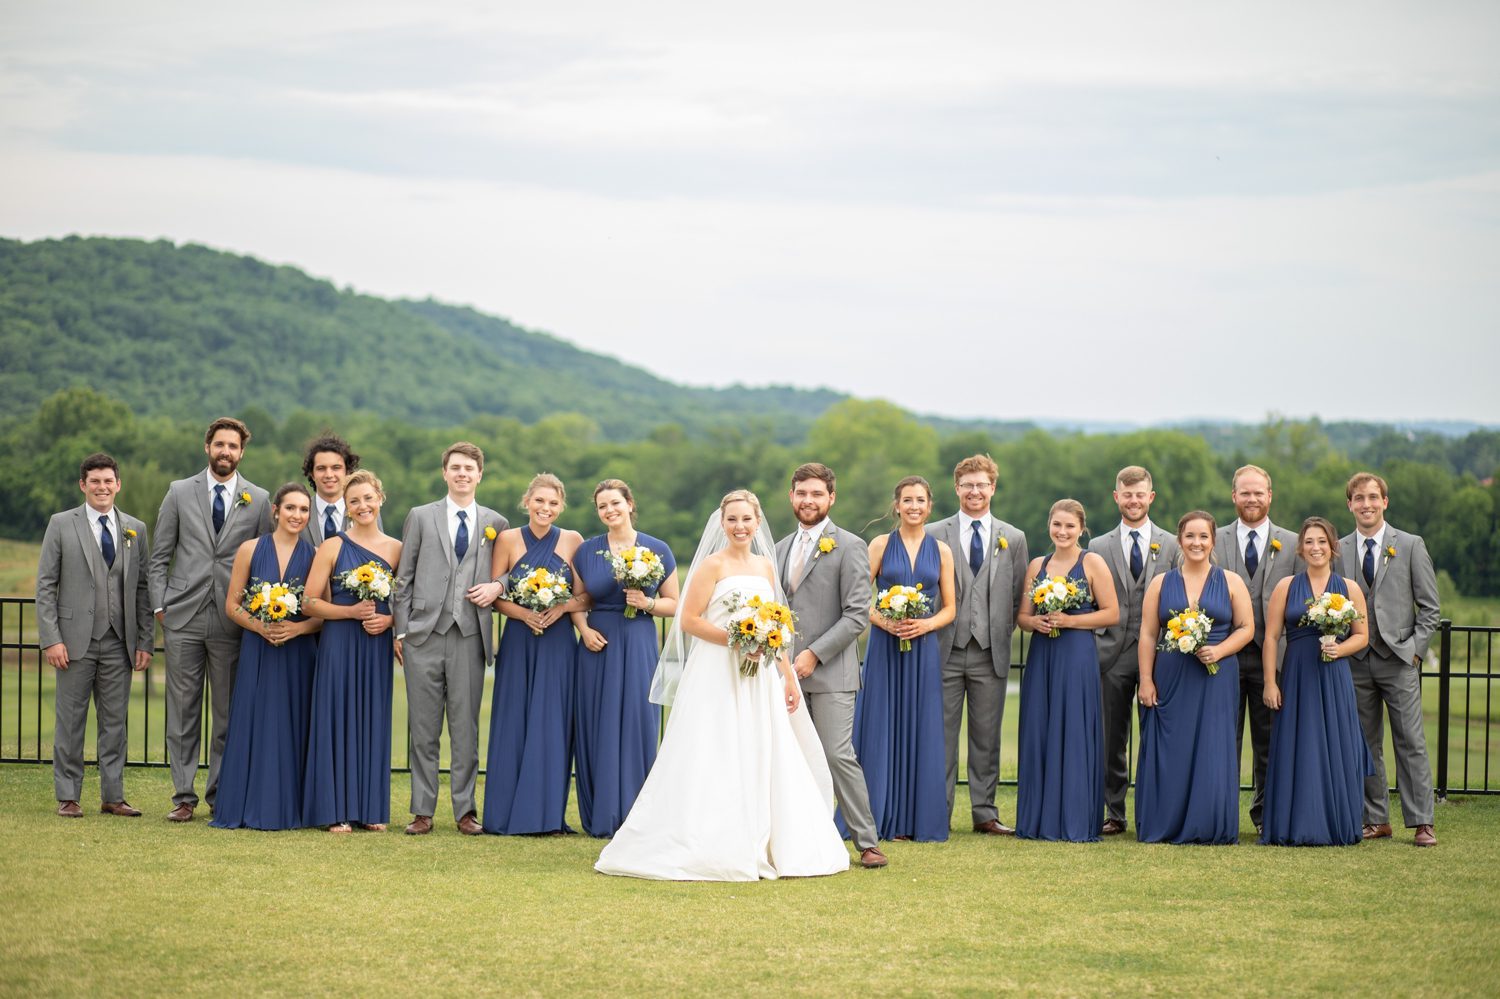 Old Natchez Country Club Wedding Party in Franklin, TN Navy Bridesmaid Dress with Gray Groomsmen Suits